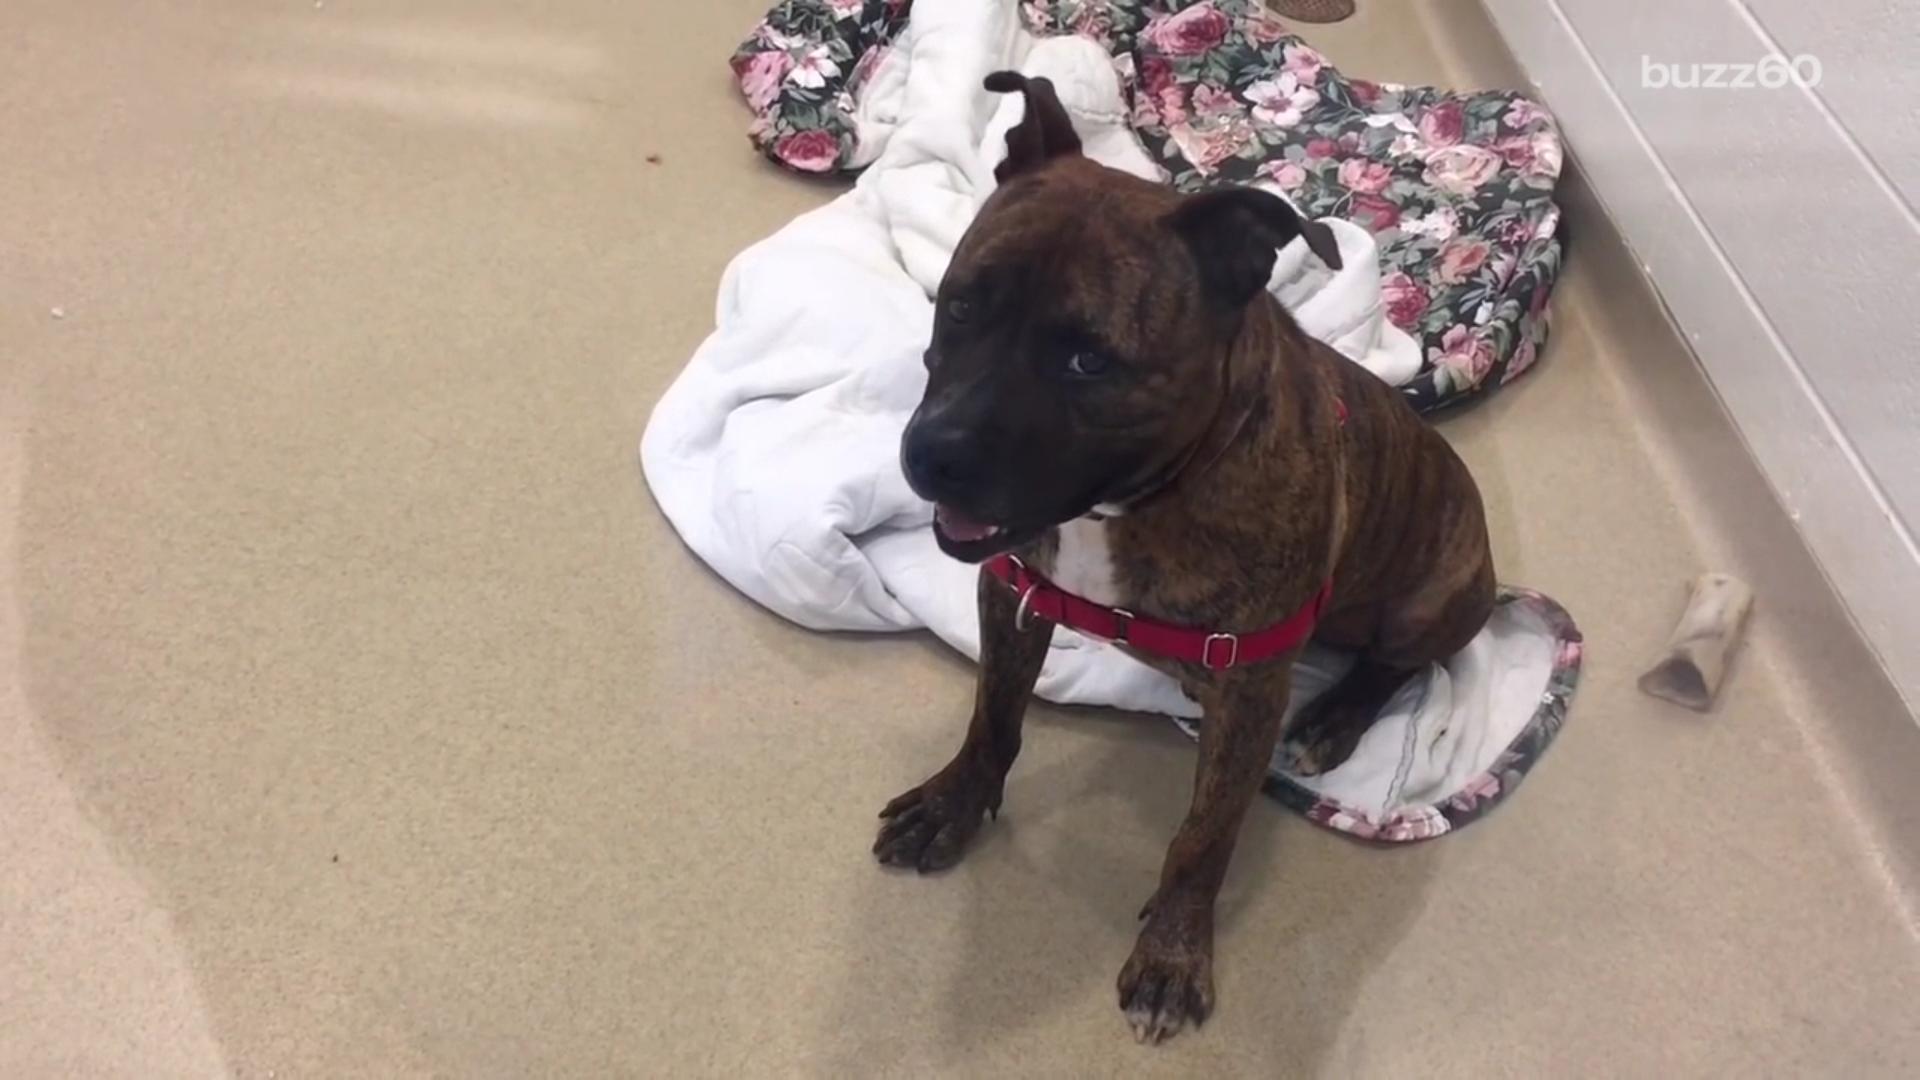 Crying Shelter Dog from Viral Video Gets Adopted, Making Us Cry